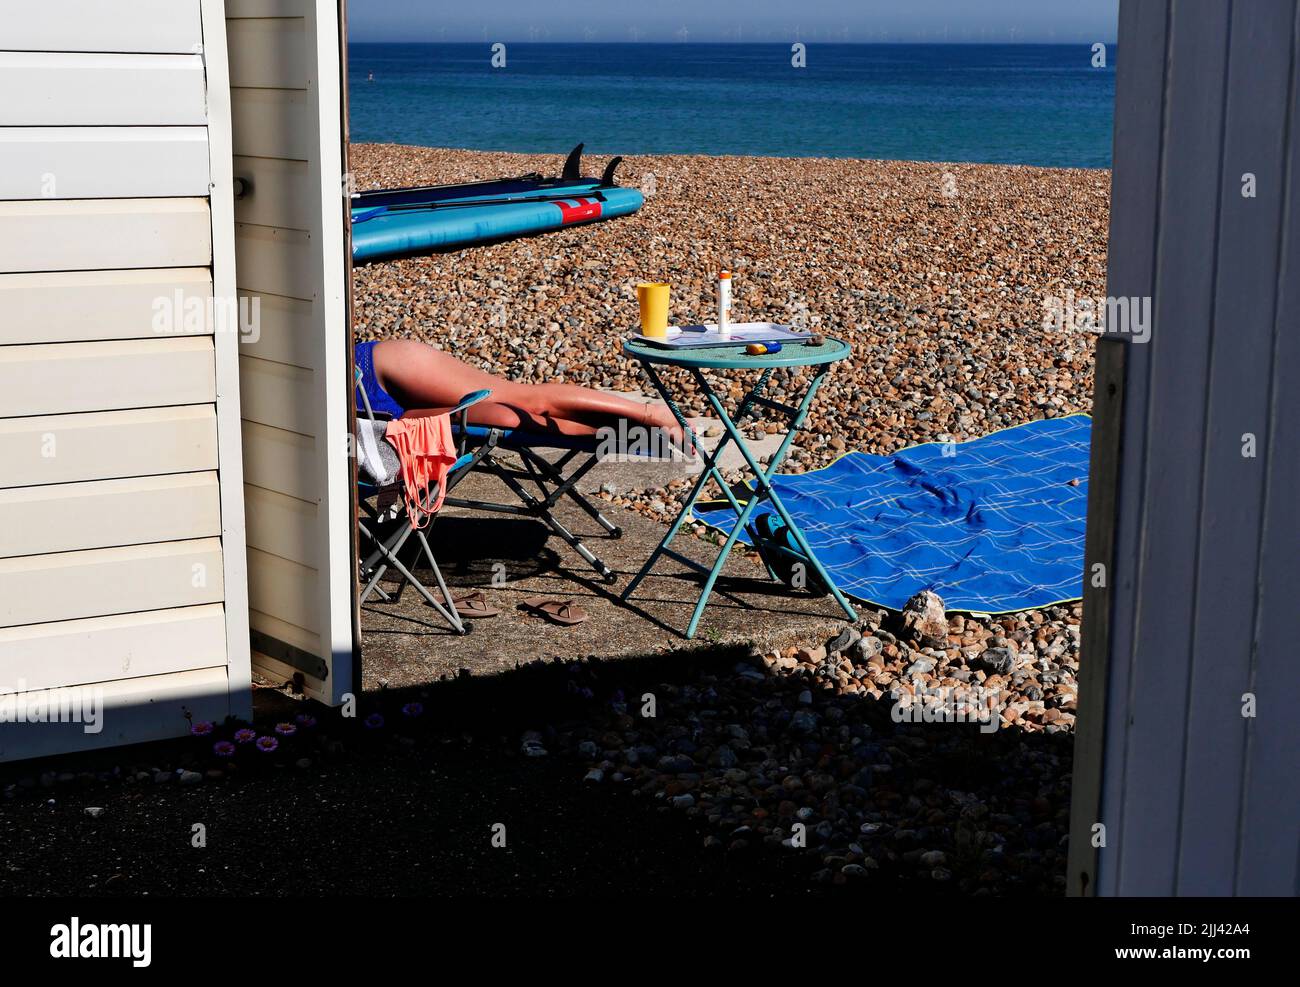 AJAXNETPHOTO. JUNE, 2021. WORTHING, ENGLAND. - BLUE SKY BLUE SEA DAY - AT THE SEASIDE, LOOKING SOUTH OVER THE ENGLISH CHANNEL.PHOTO:JONATHAN EASTLAND/AJAX REF:GX9 211209 2462 2 Stock Photo